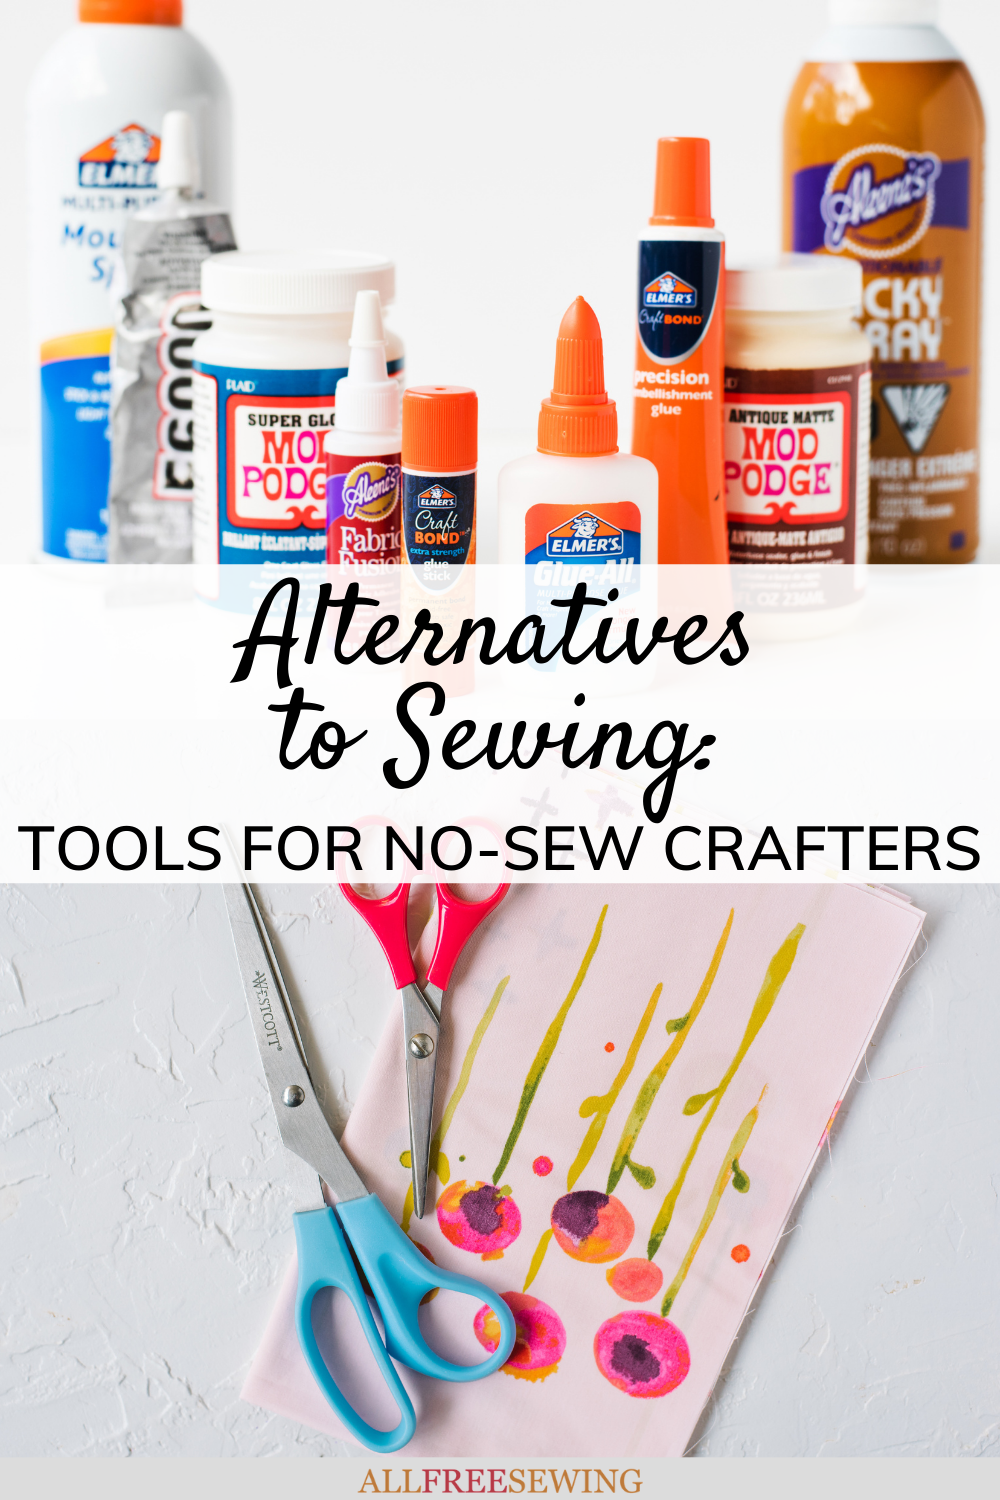 Top Gifts for Sewing Enthusiasts from Scissors to Cricut - Rae Gun